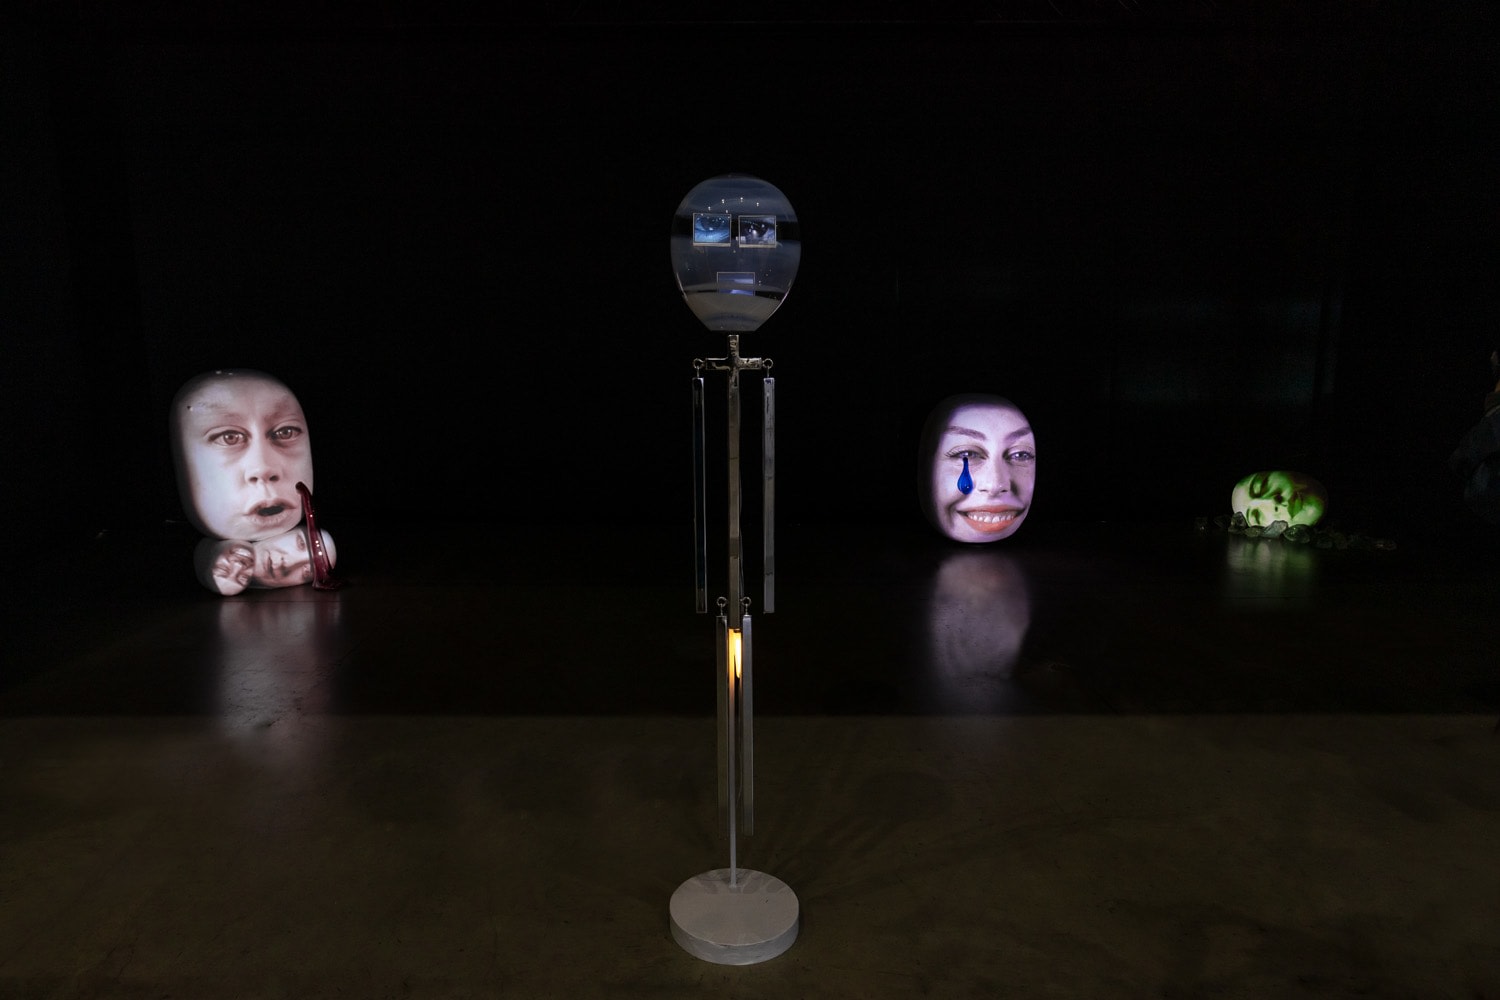 Installation view of special exhibition by Tony Oursler at Taipei Dangdai art fair 2020, view 1